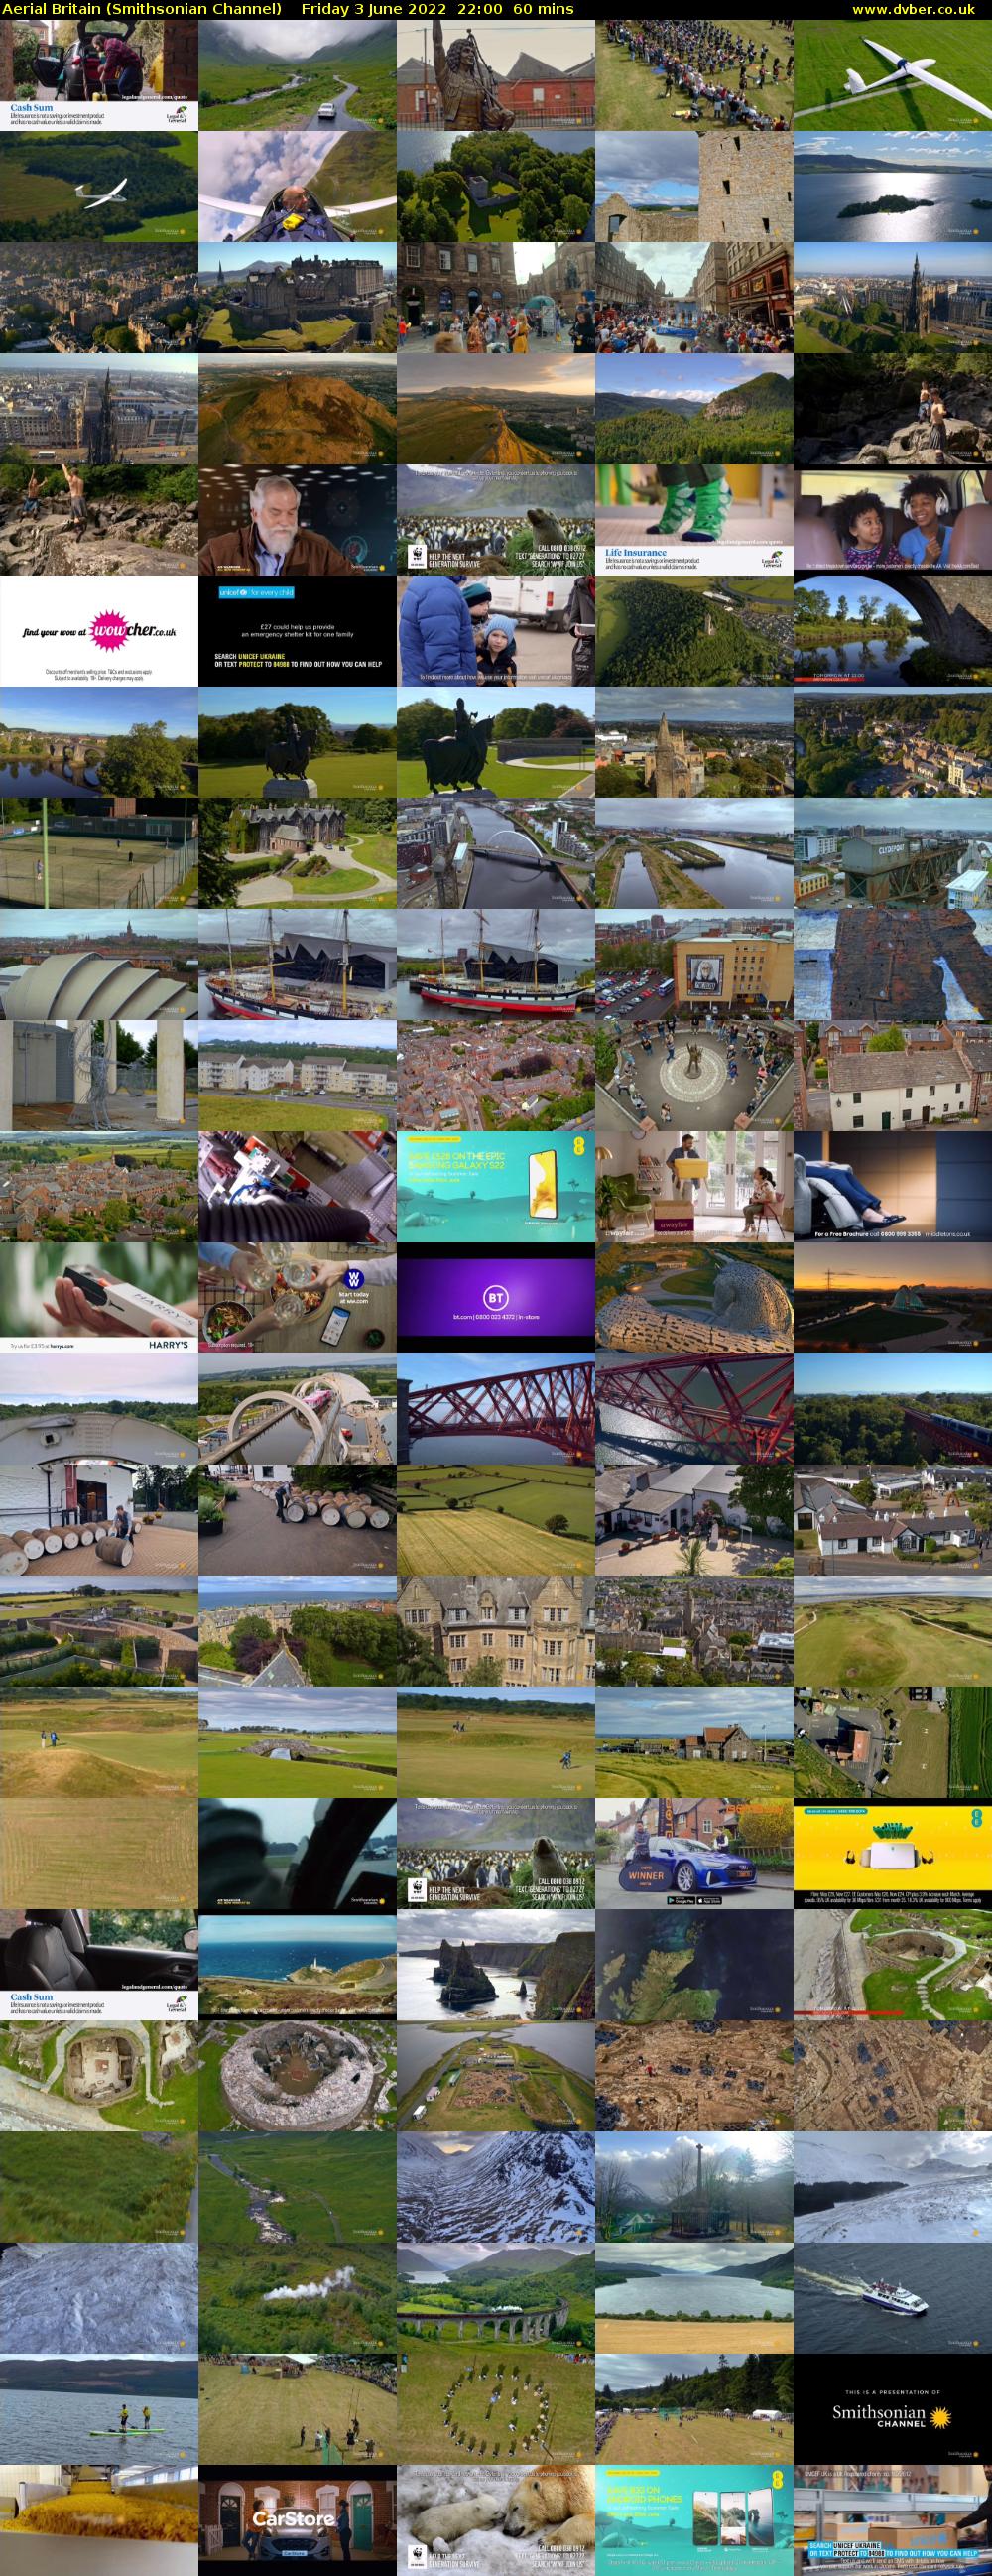 Aerial Britain (Smithsonian Channel) Friday 3 June 2022 22:00 - 23:00